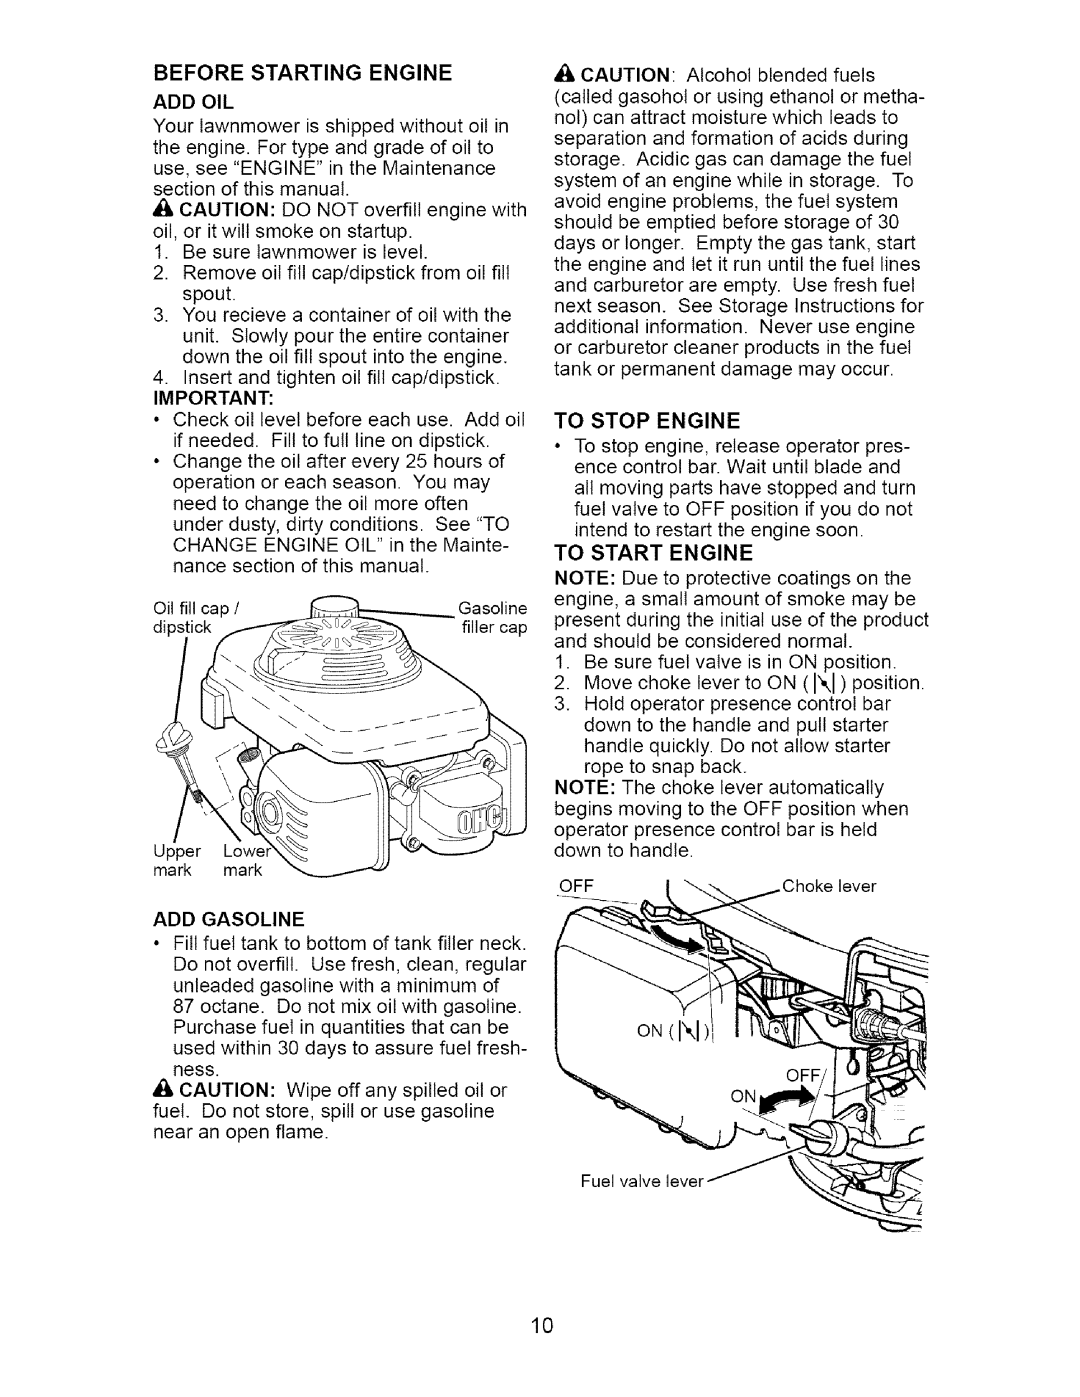 Craftsman 917.371721 owner manual Before Starting Engine, Add Oil, To Stop Engine 